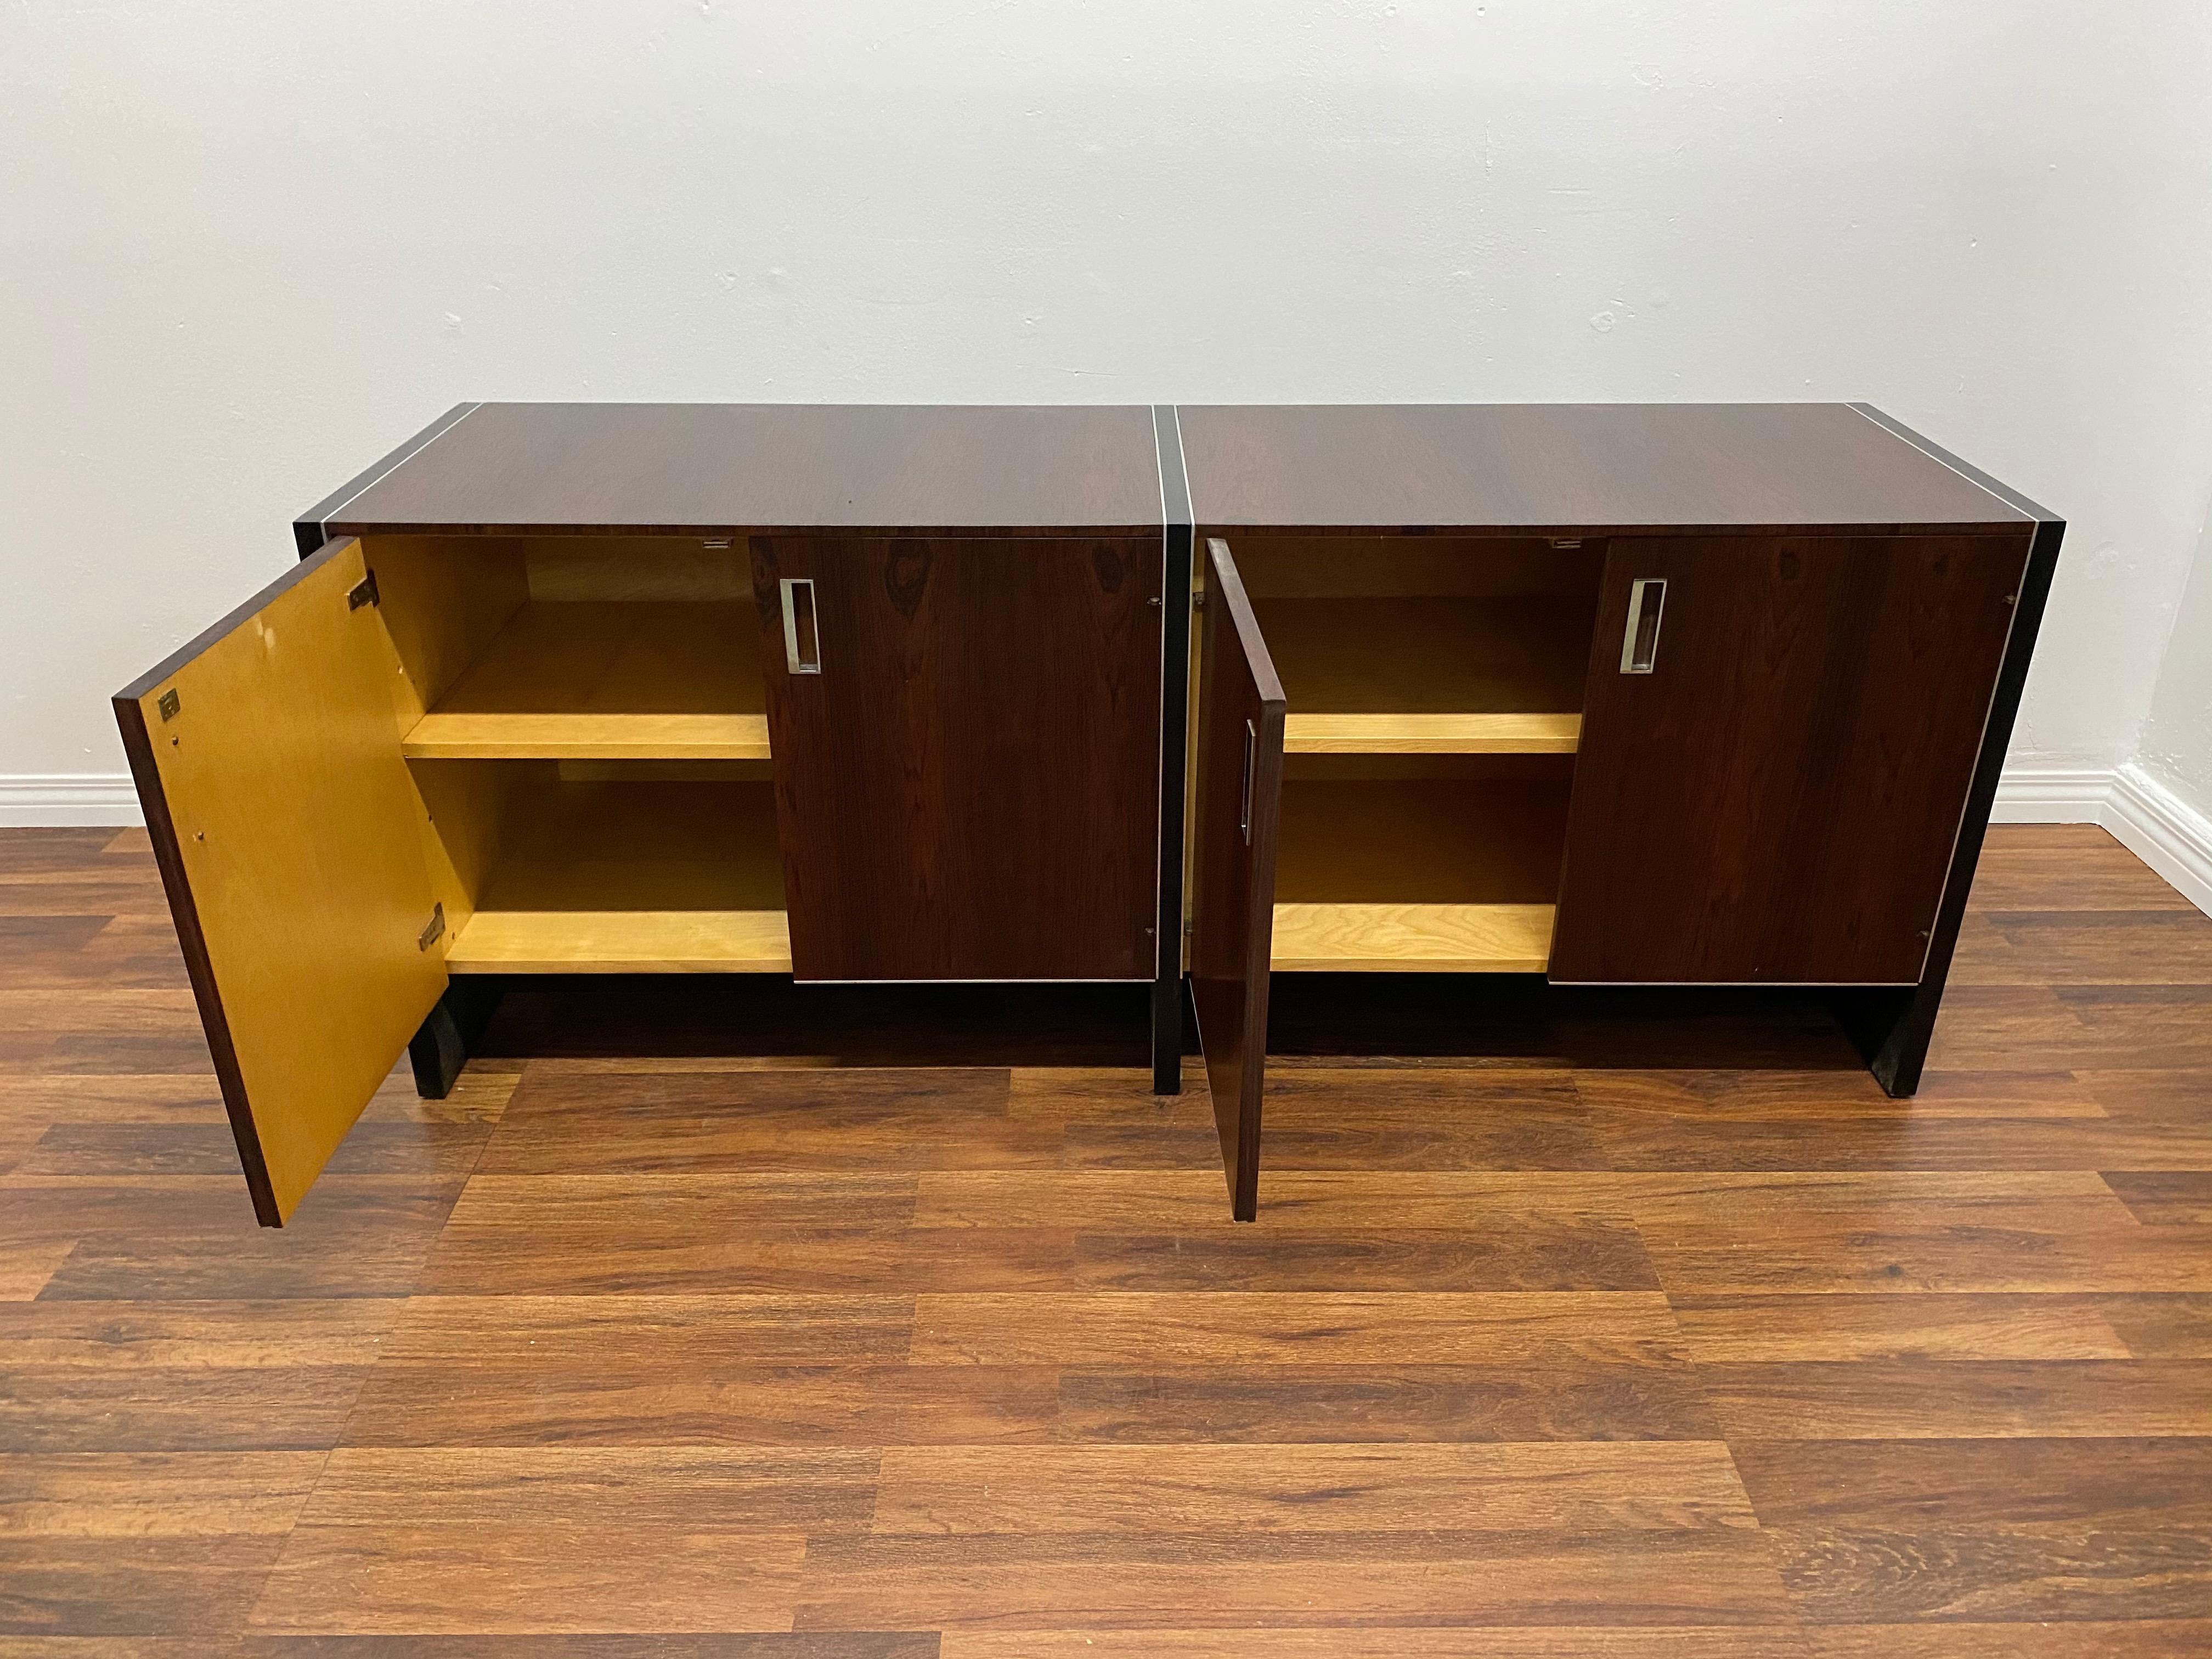 An exquisite Robert Baron for Glenn of California rosewood sideboard credenza, 1970. Ebonized oak side panels. Highly figured Brazilian rosewood doors with inset chrome handles and trim. Maple interior with adjustable shelfs. In great condition.

 